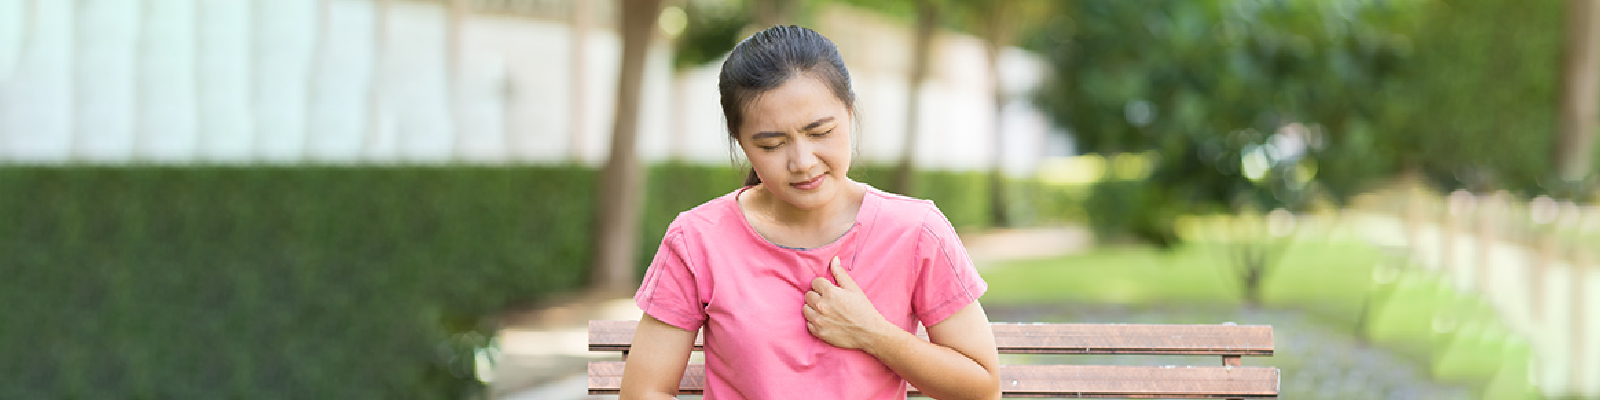 COPD and Heart Failure: What are the Symptoms and How are They Related?